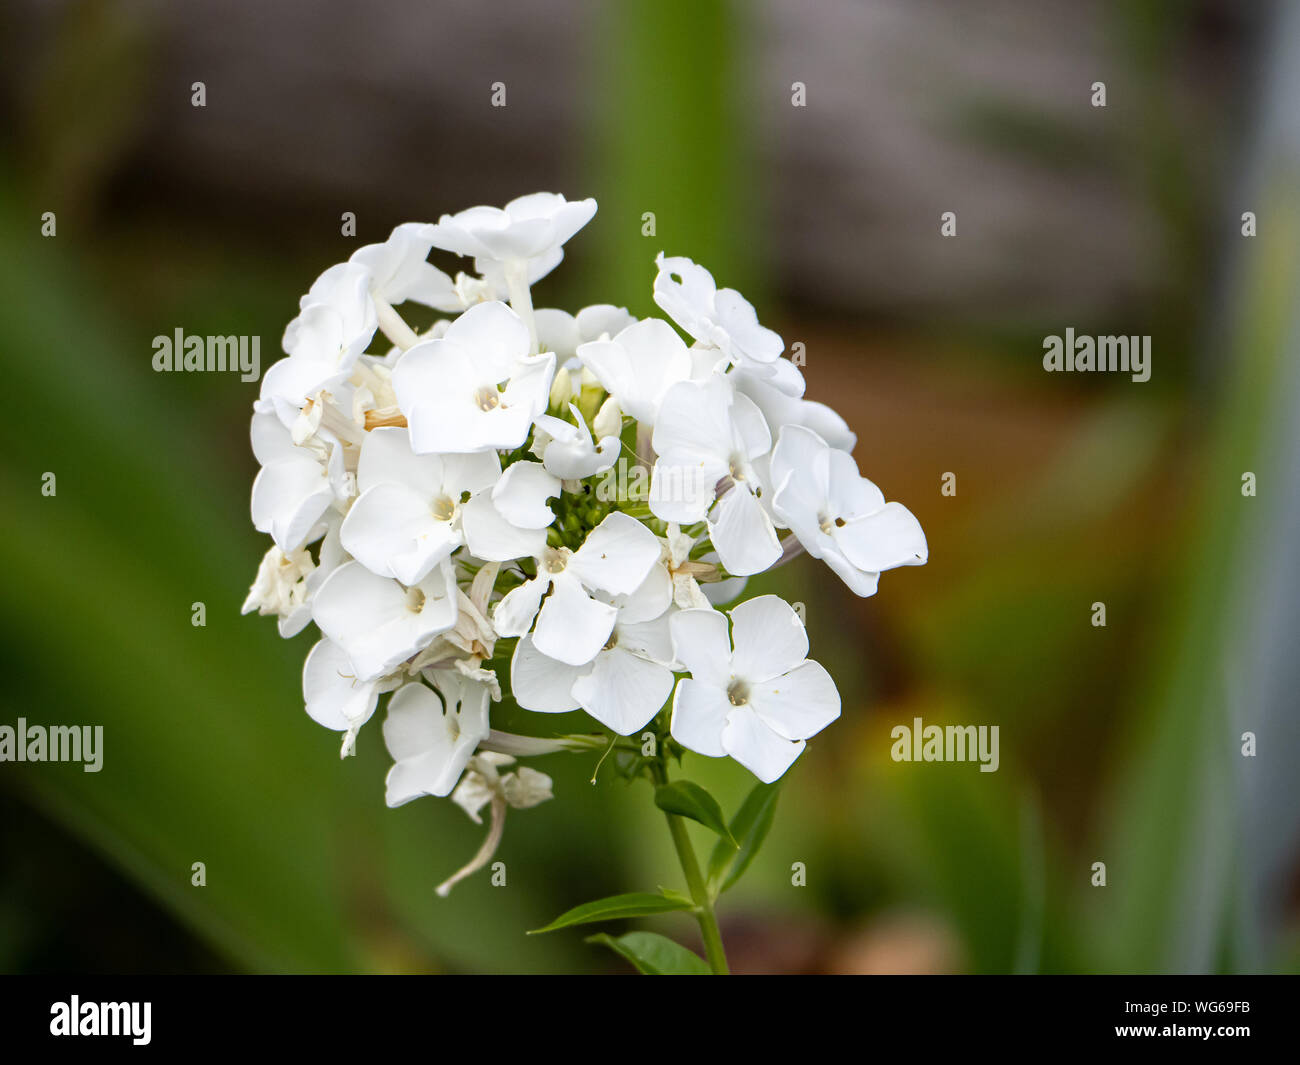 A cluster of fall phlox flowers, Phlox paniculata, blooming in a planter box in a park in Yokohama, Japan Stock Photo